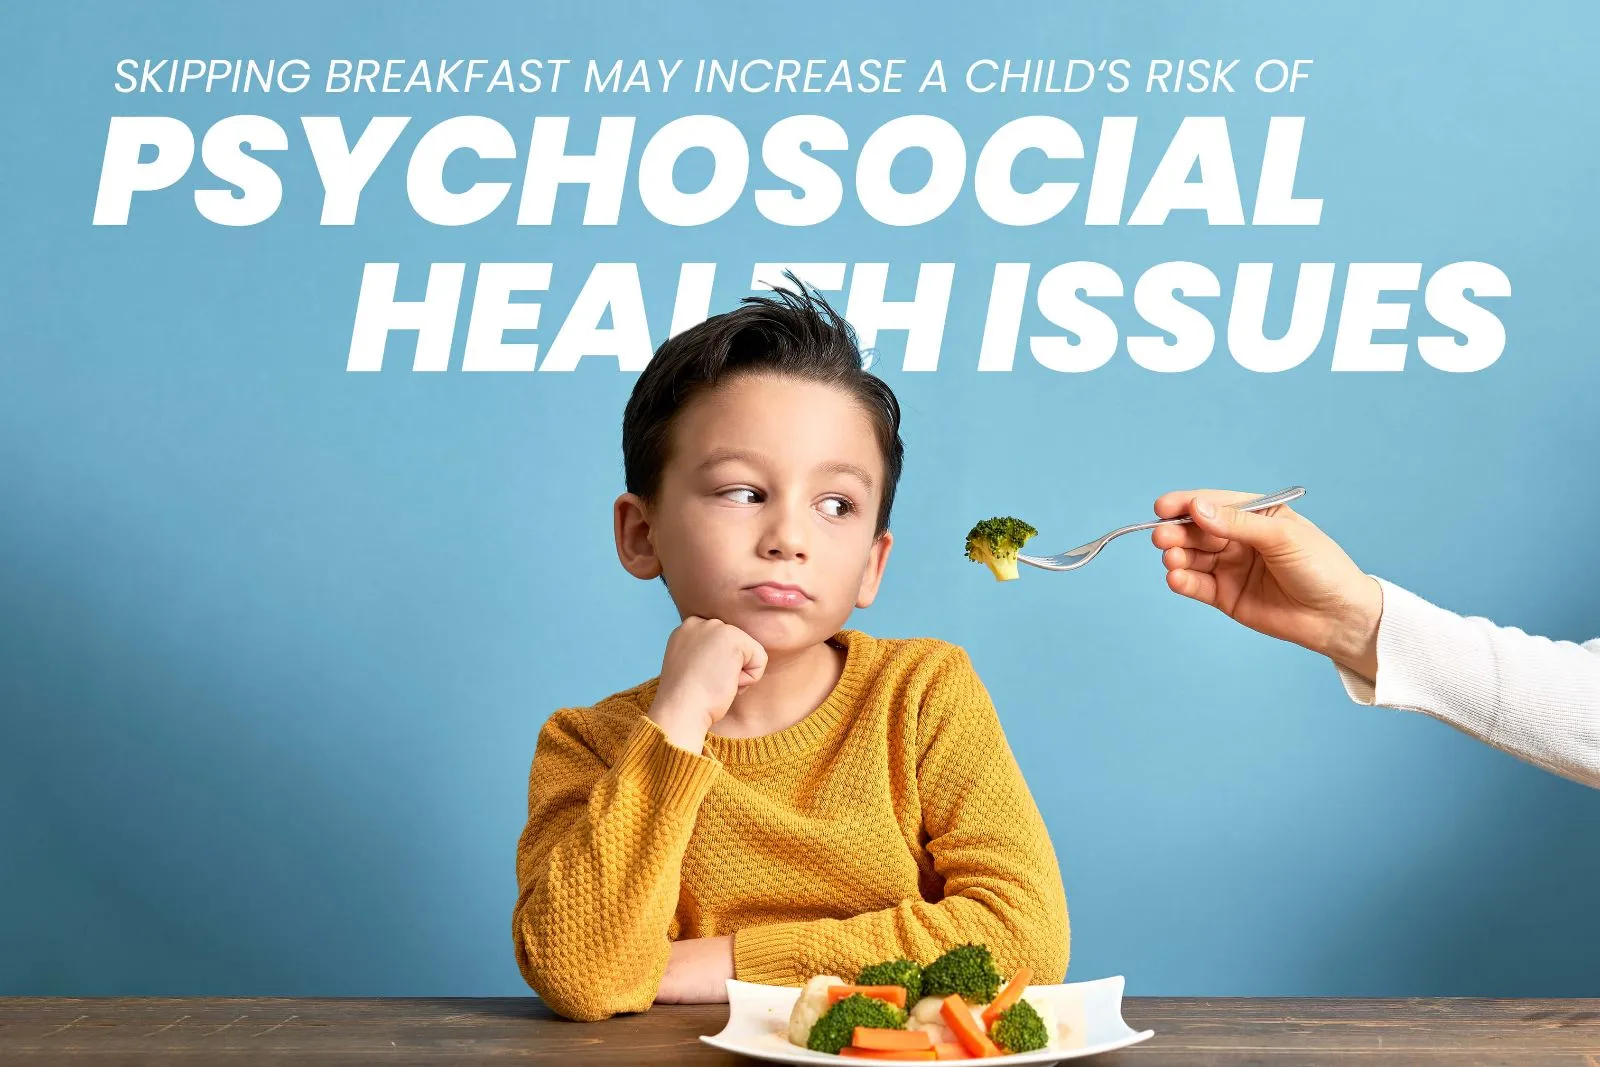 According to a study, skipping breakfast or eating it away from home may increase a child's risk of psychosocial health issues